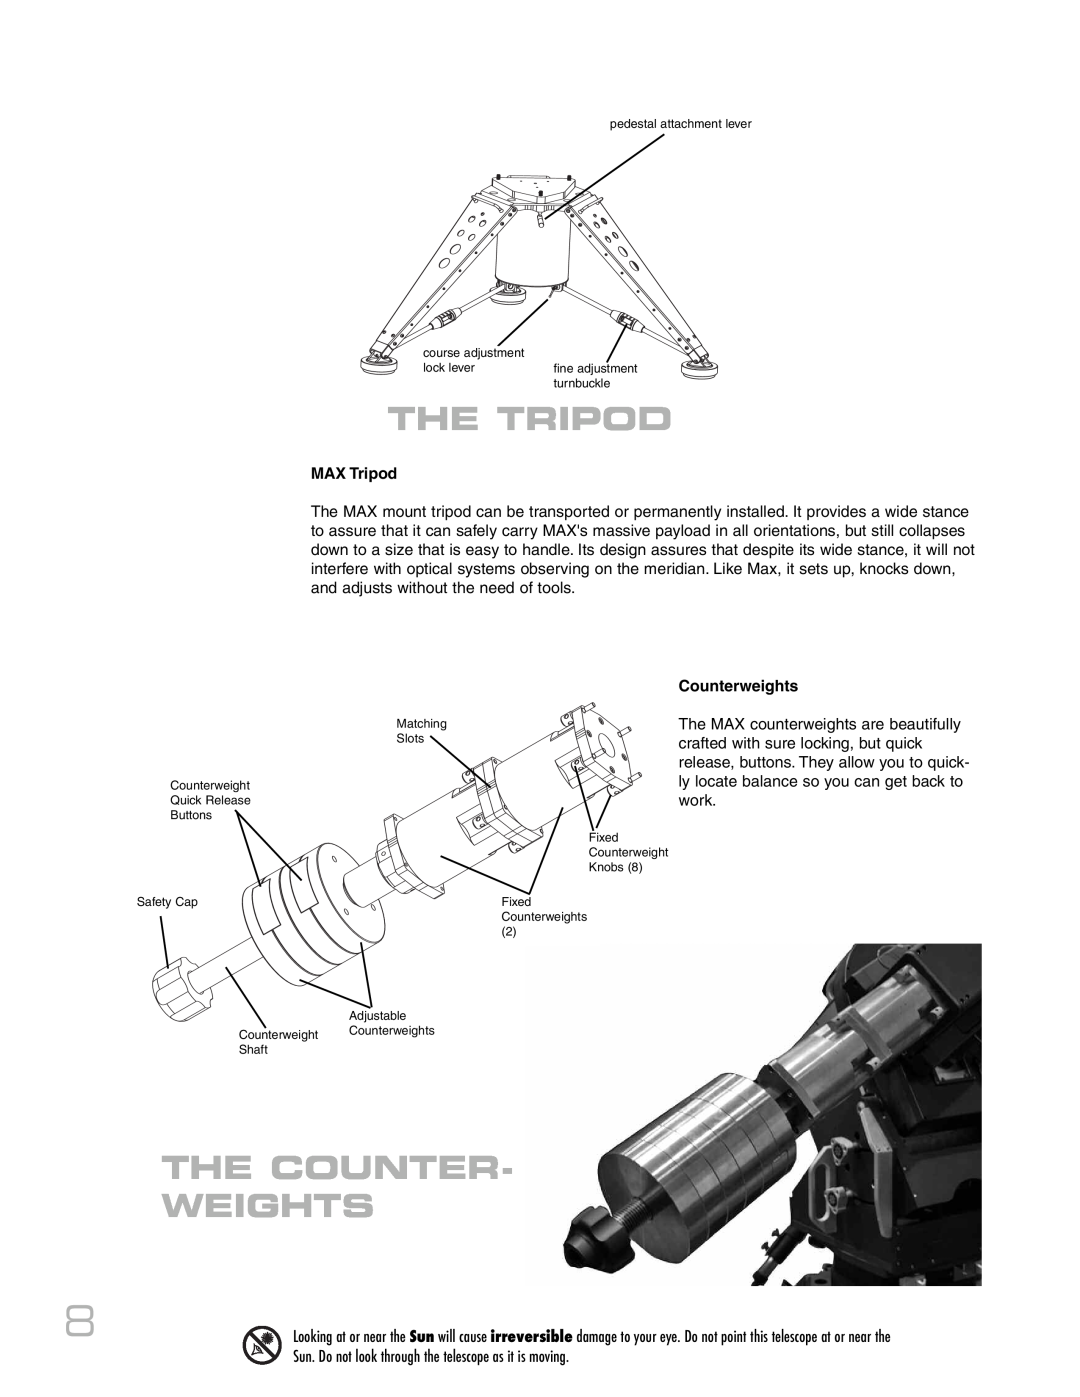 Meade RCX400 instruction manual The Tripod, The Counter- Weights, MAX Tripod, Counterweights 